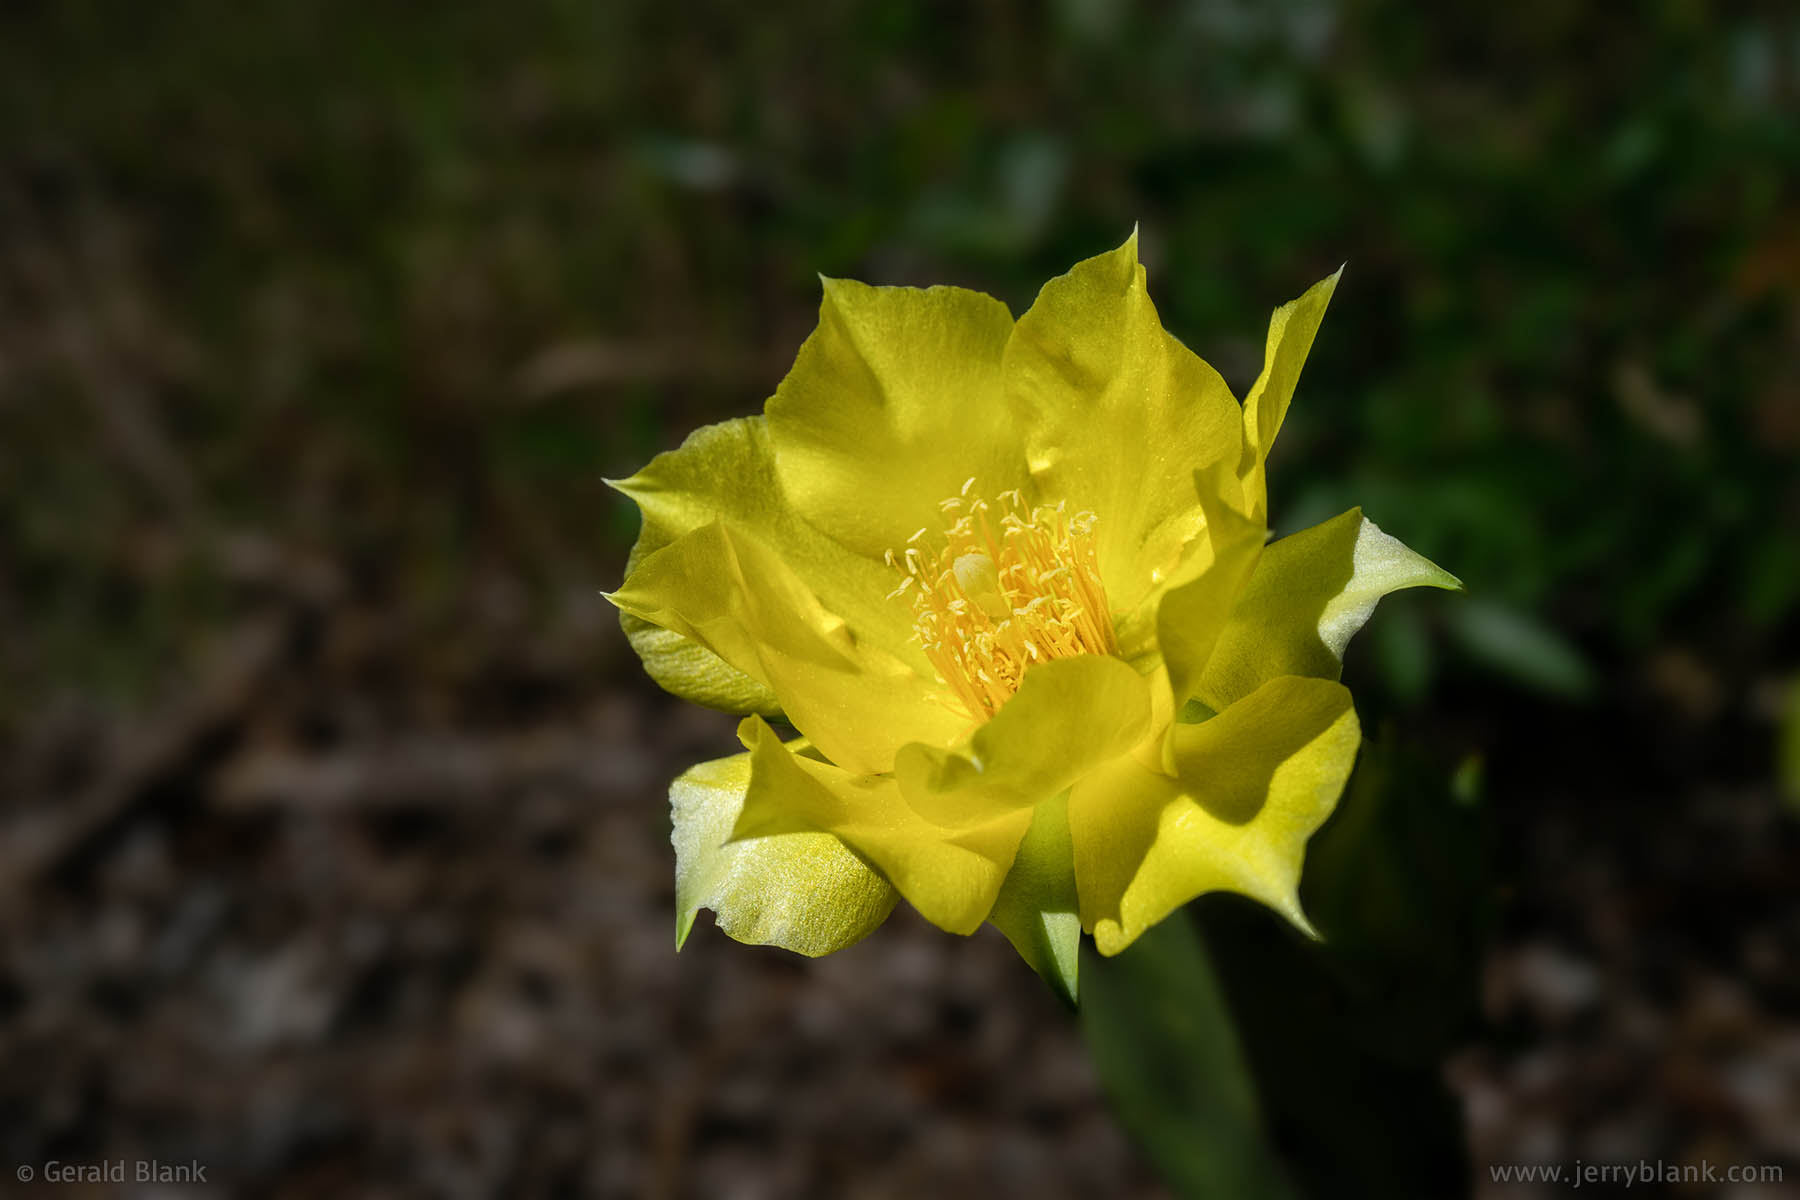 70030 - Eastern prickly pear cactus (Opuntia humifusa), flowering in the Hills of Minneola, Lake County, FL - photo by Jerry Blank